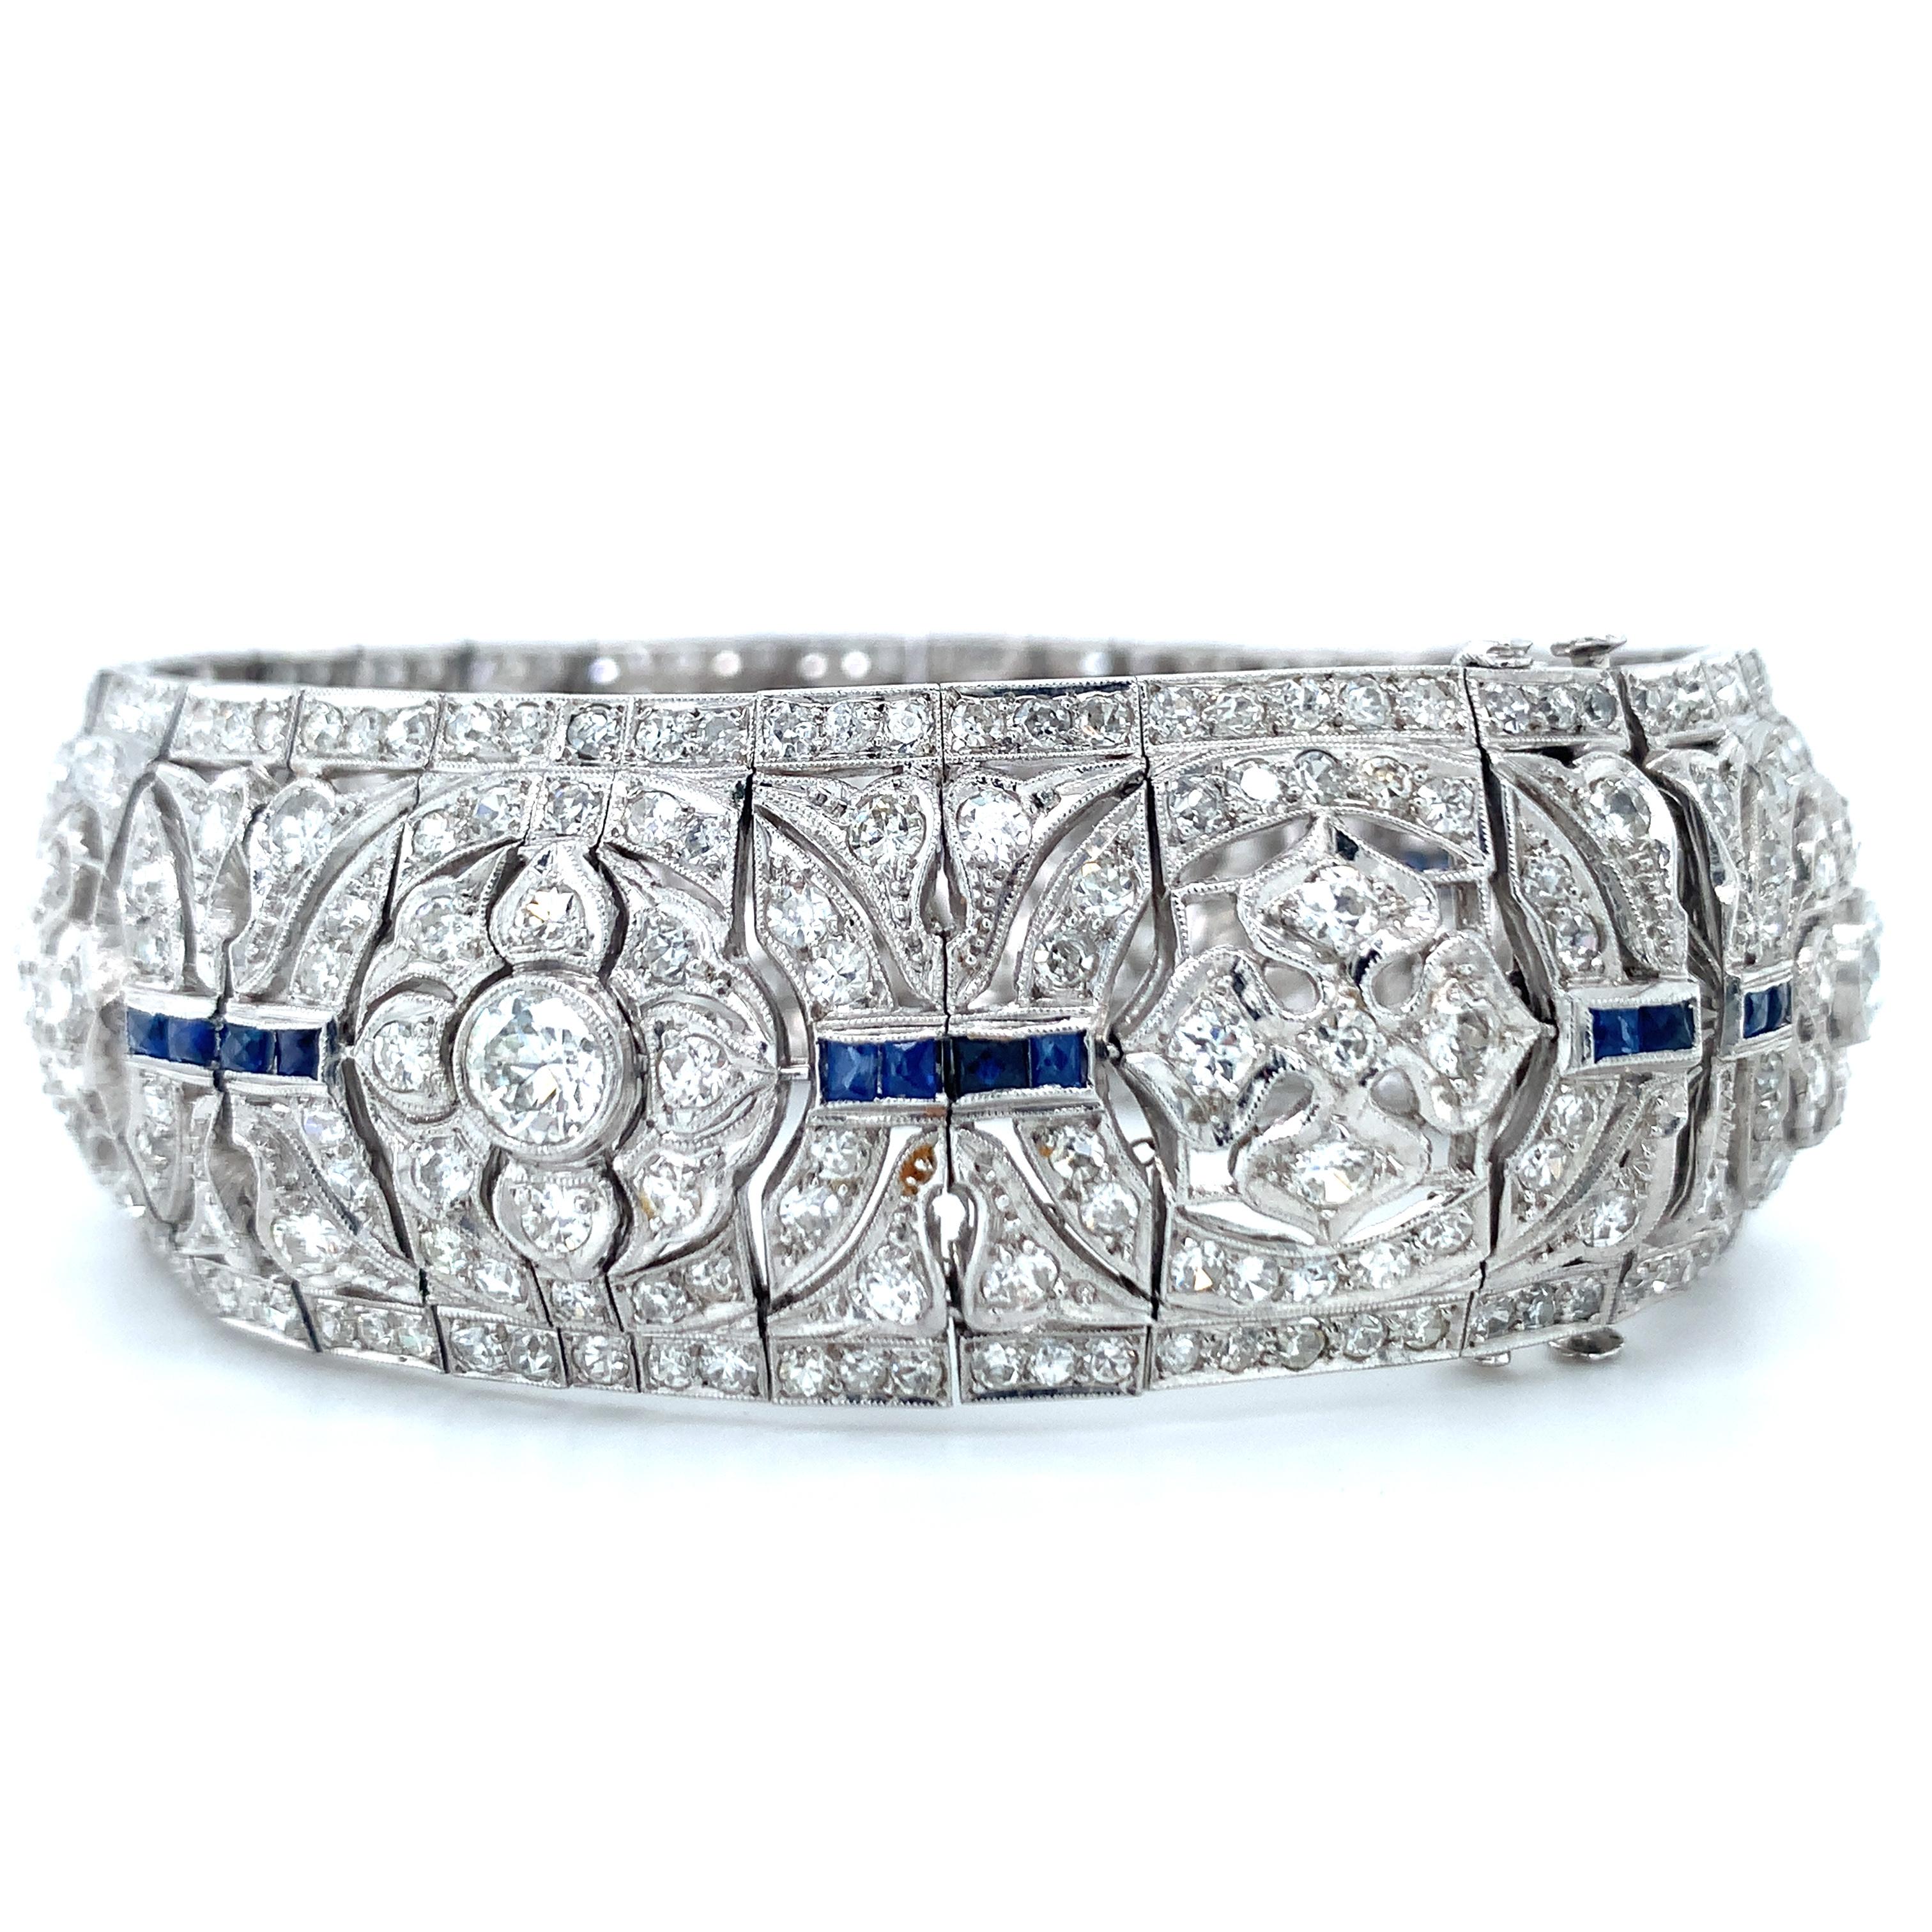 One Art deco wide strap diamond and sapphire bracelet handmade in platinum featuring 408 old European cut and single round cut diamonds totaling 16.44 ct. with H-I-J color and SI-1 clarity. The bracelet is enhanced by 32 French cut, sapphire accents